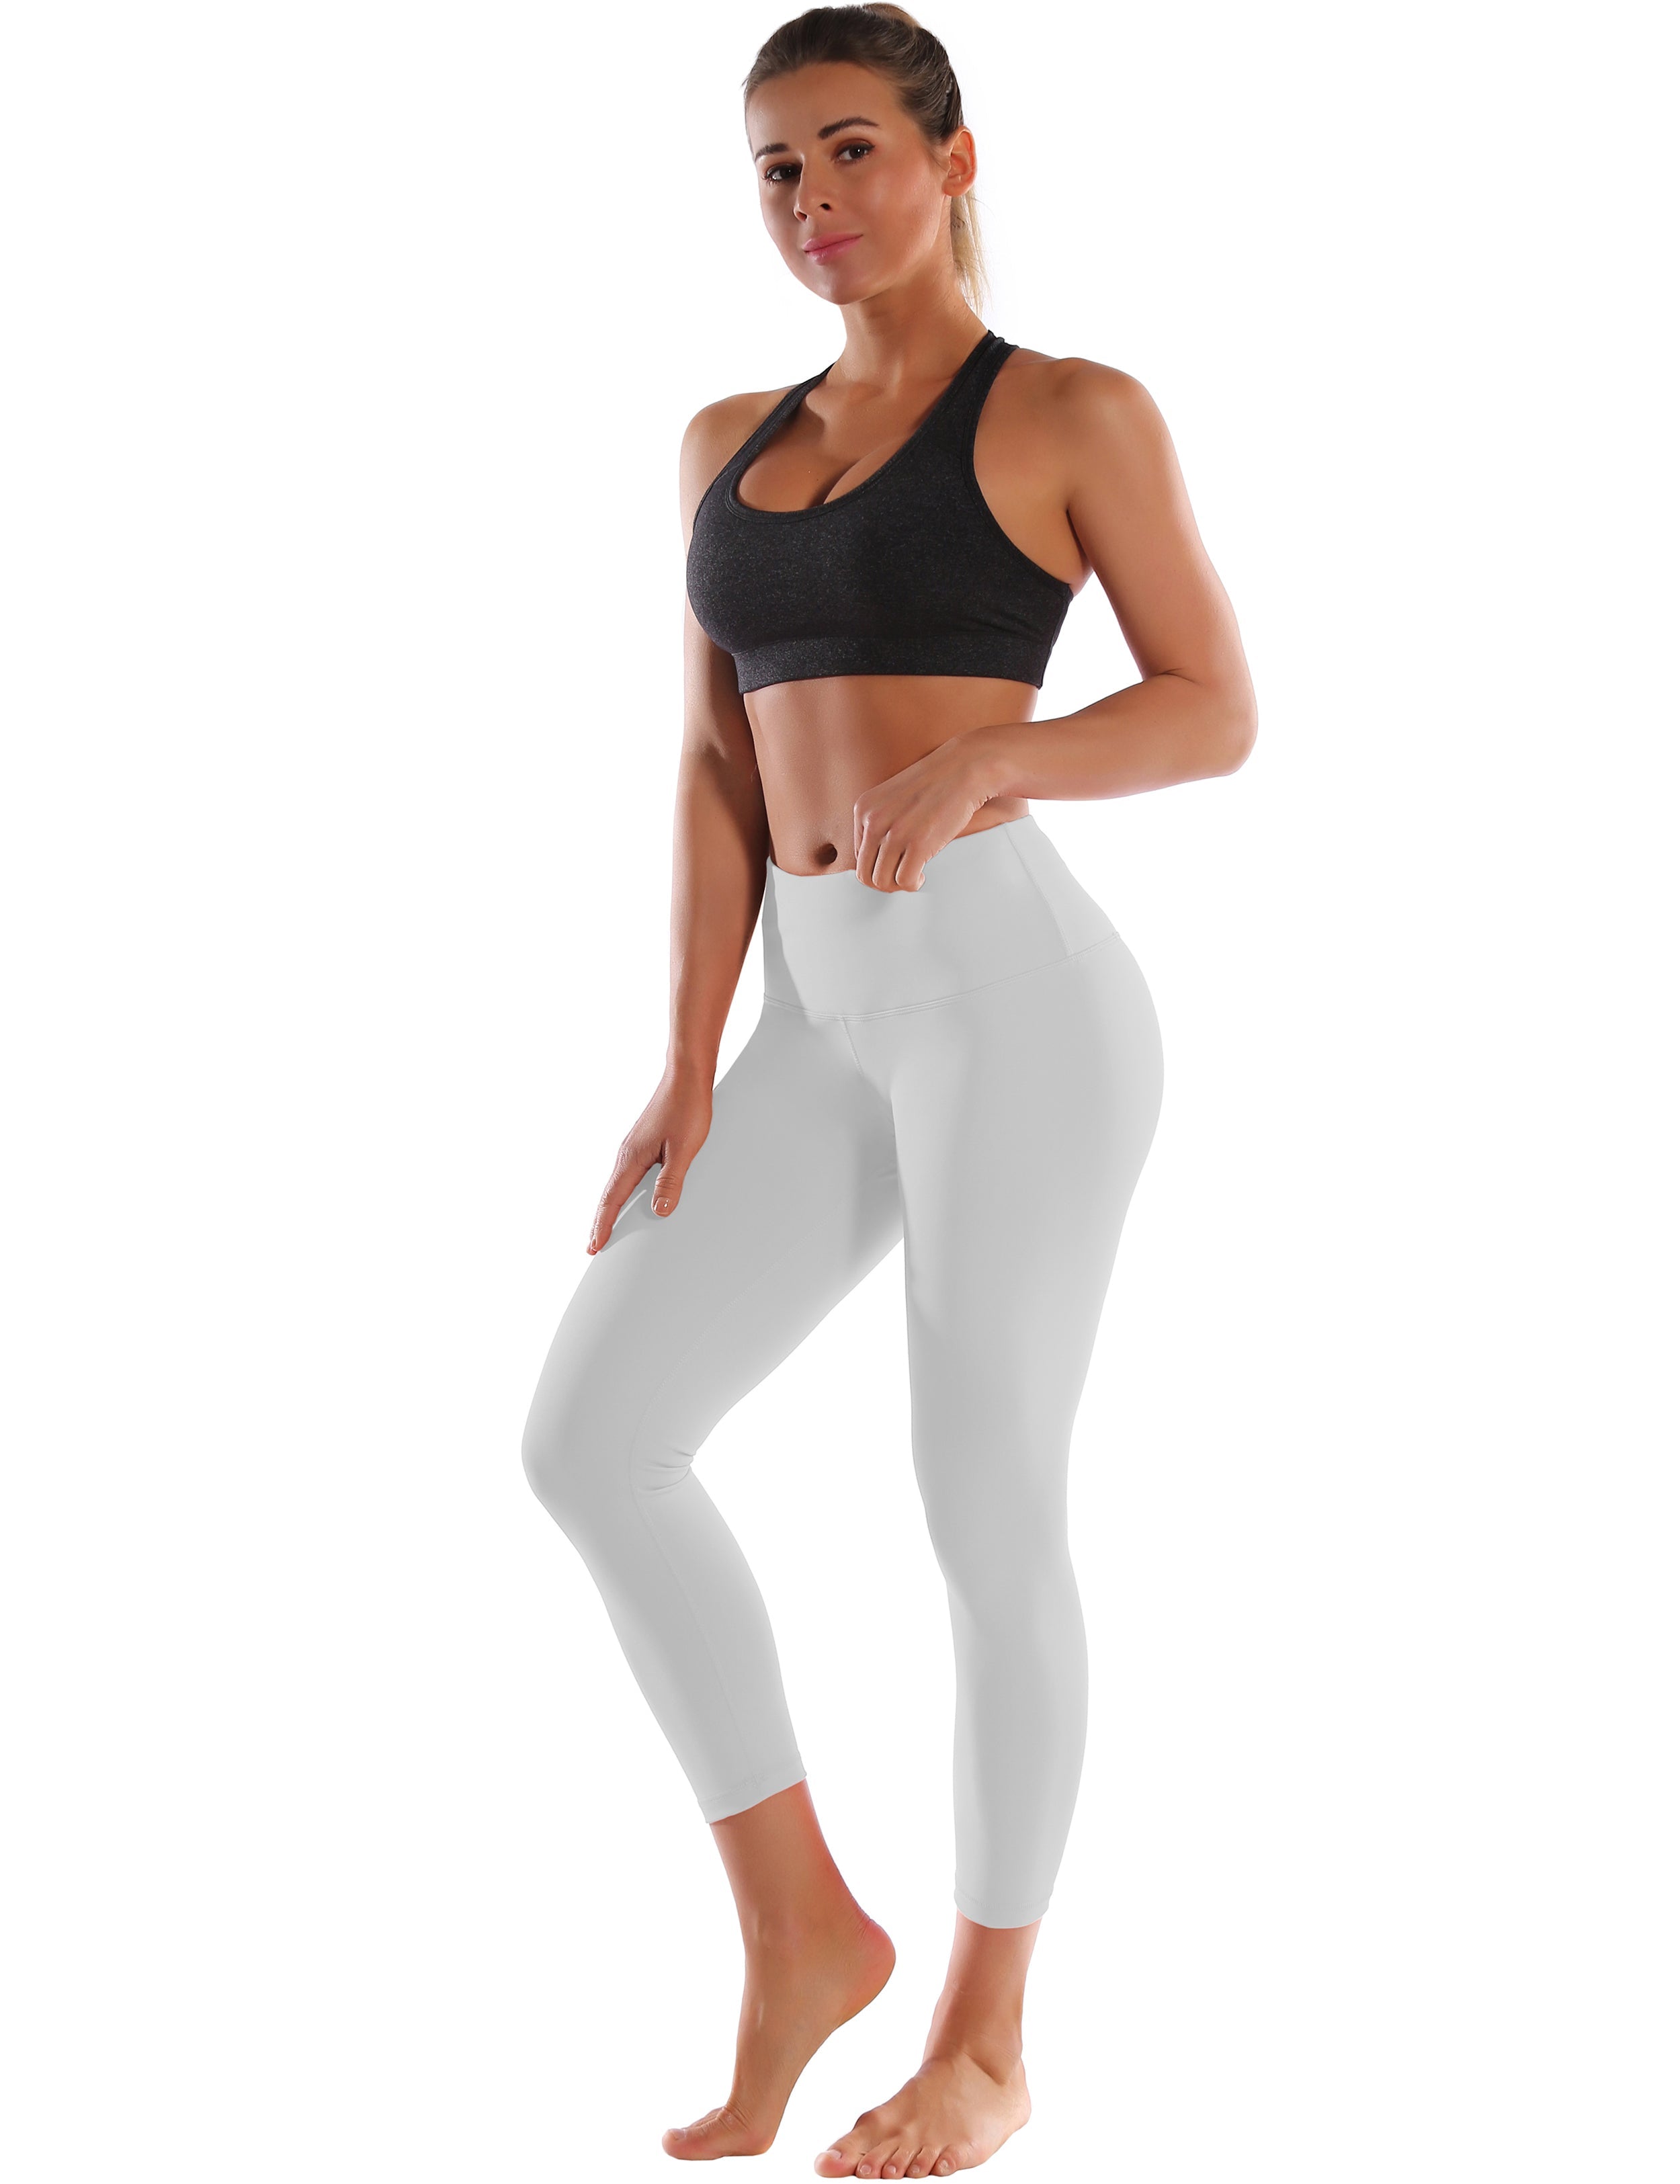 22" High Waist Crop Tight Capris lightgray 75%Nylon/25%Spandex Fabric doesn't attract lint easily 4-way stretch No see-through Moisture-wicking Tummy control Inner pocket